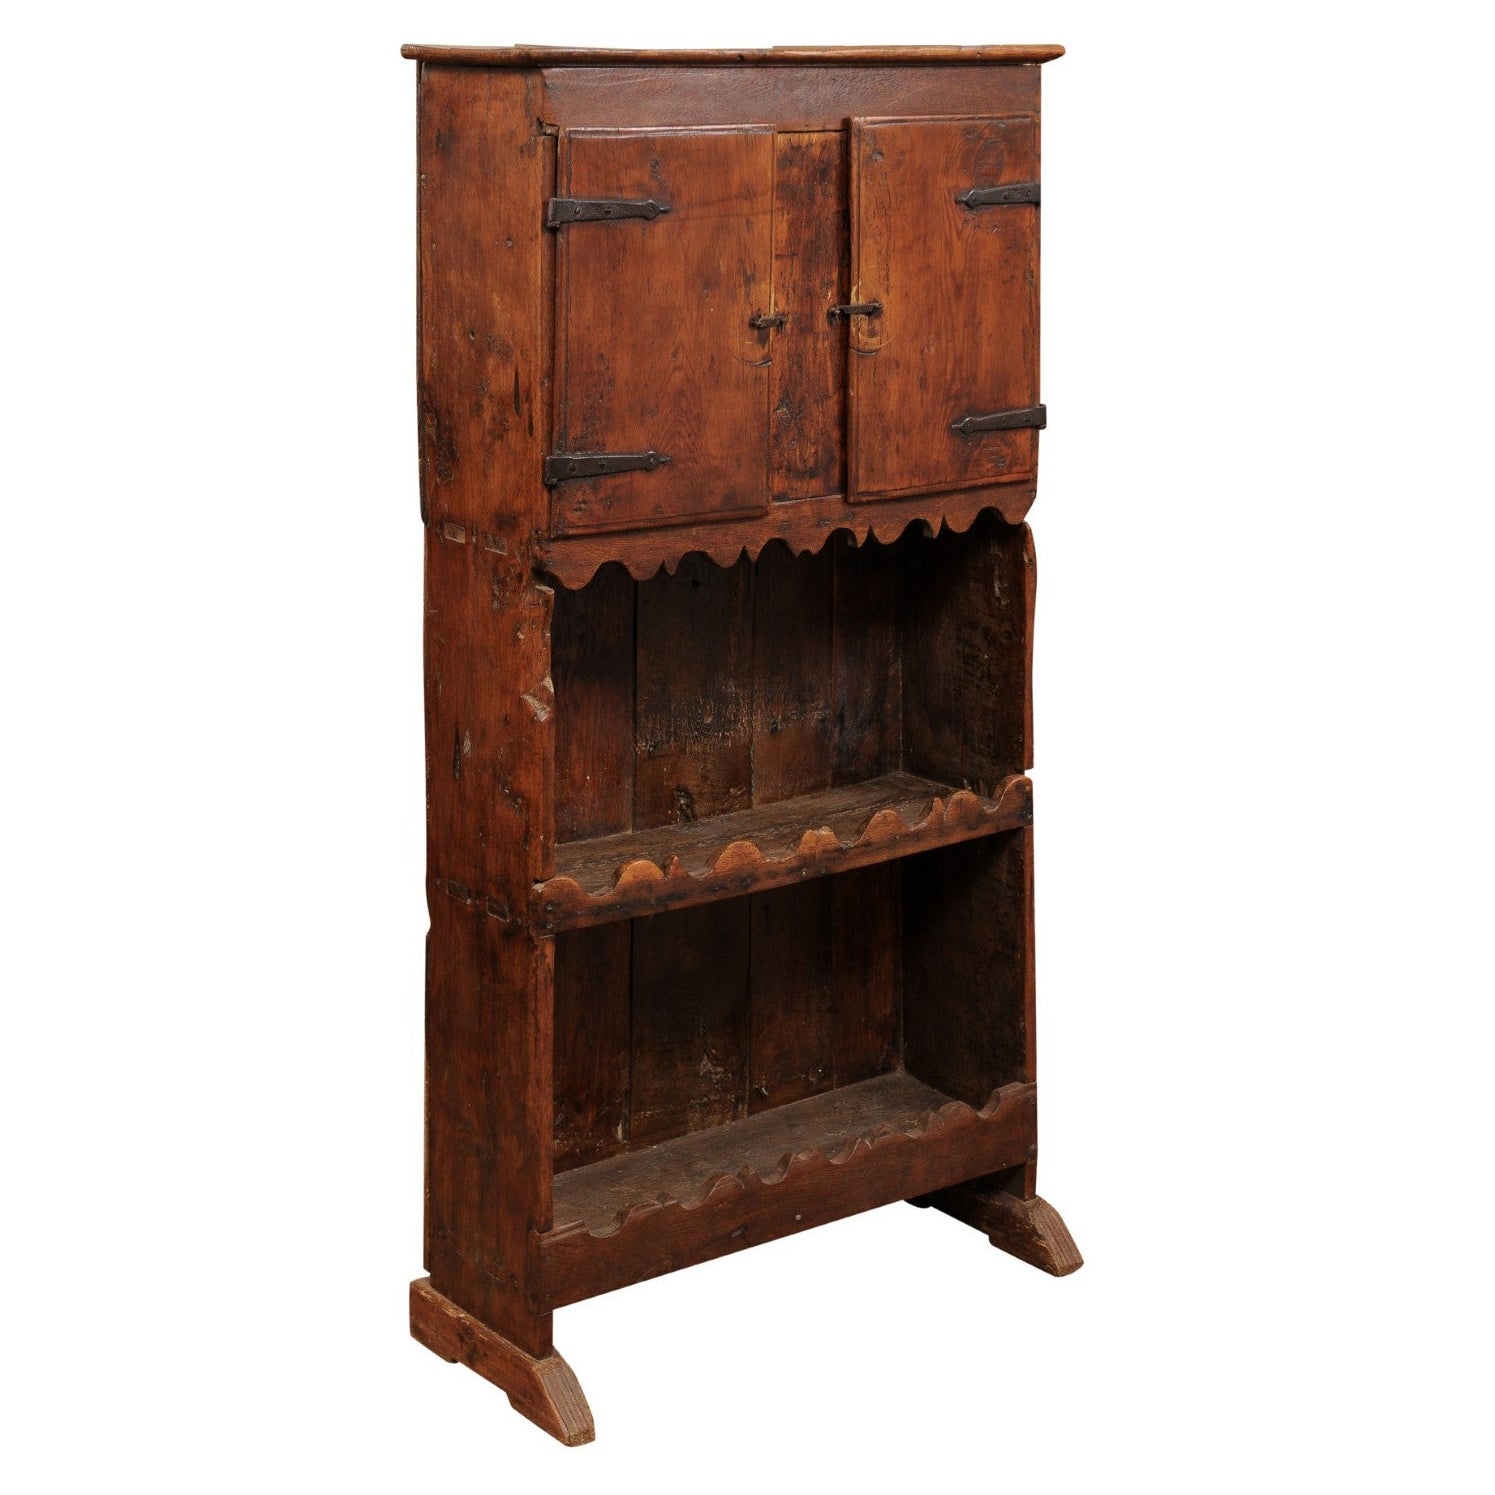 18th Century Spanish Pine Cupboard with 2 Cabinet Doors over Open Shelves